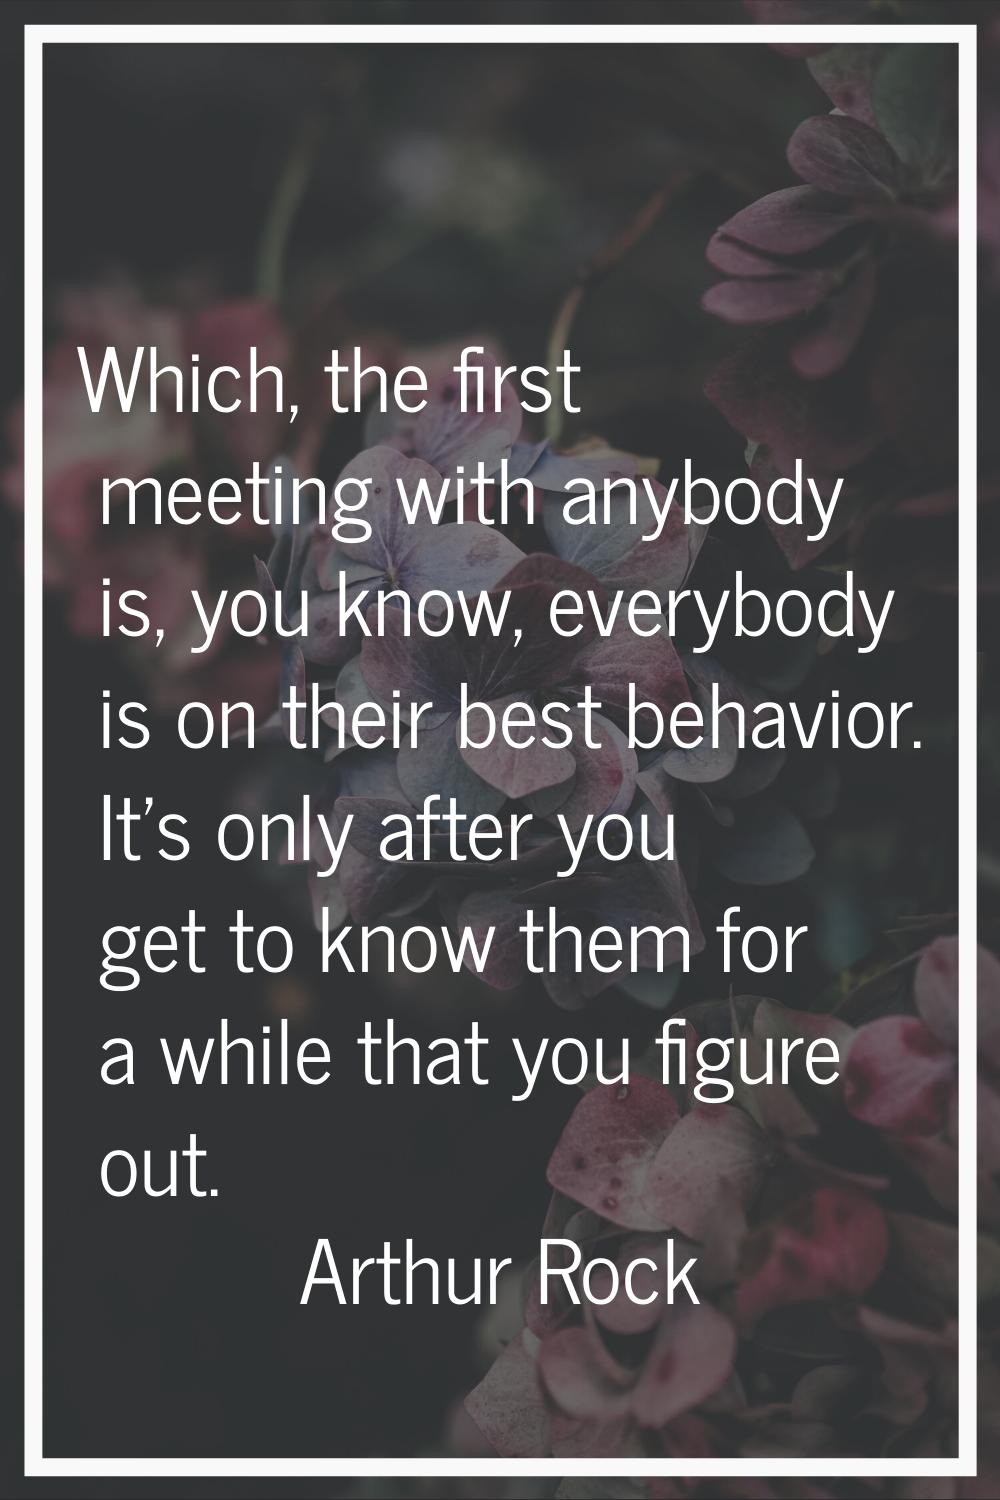 Which, the first meeting with anybody is, you know, everybody is on their best behavior. It's only 